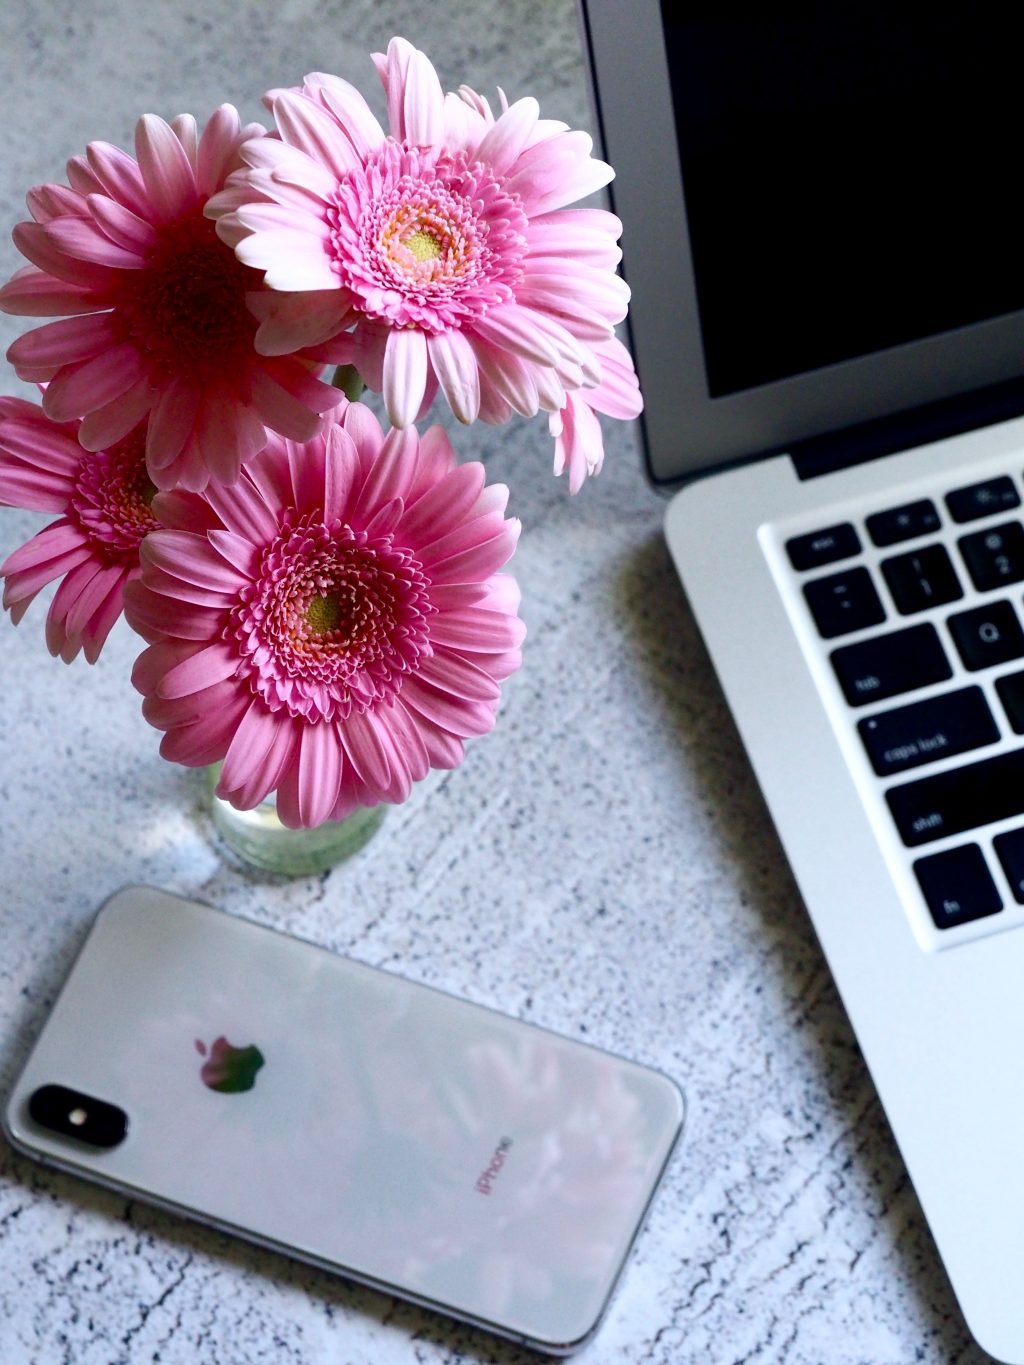 phone and laptop with flowers